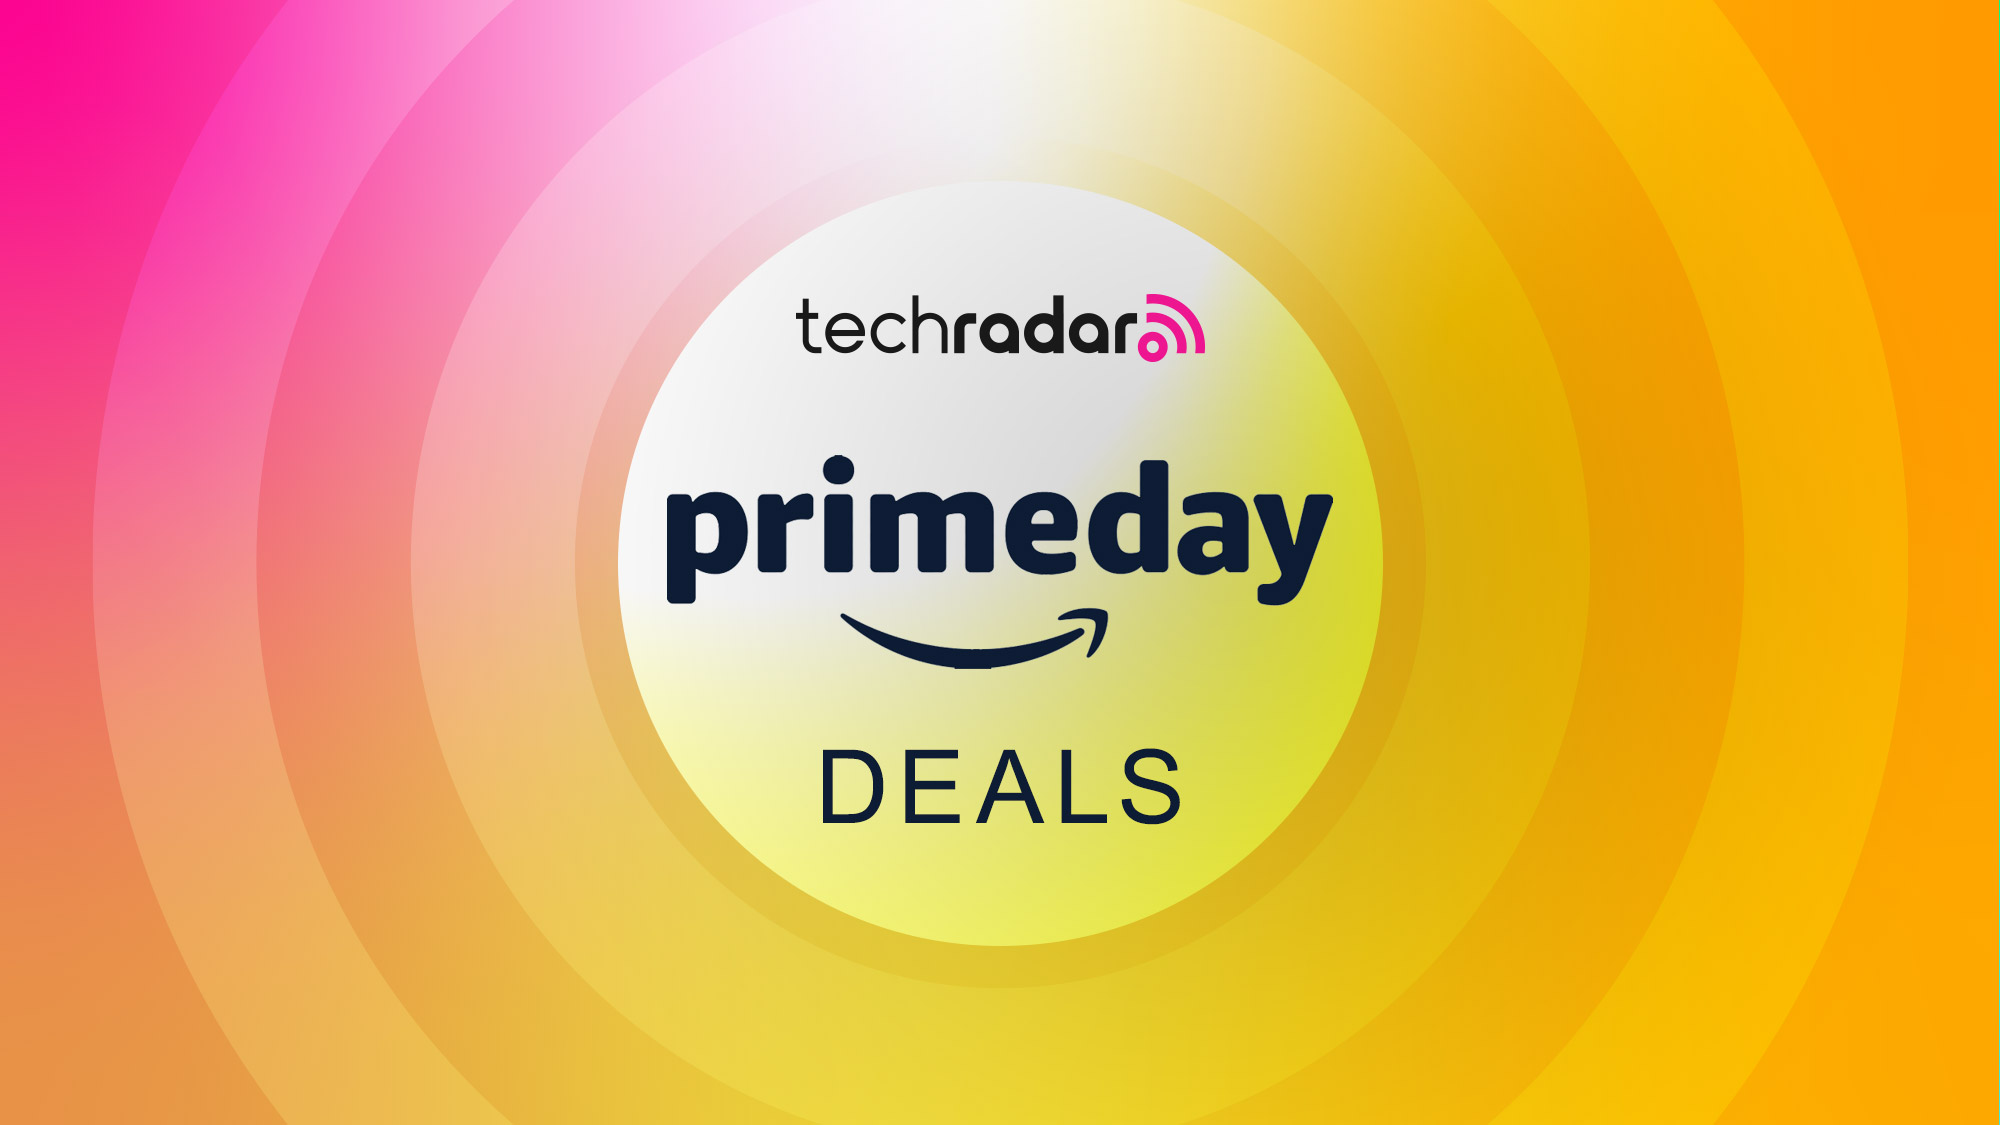 Try our Prime Day chatbot to find the best deals right now | TechRadar